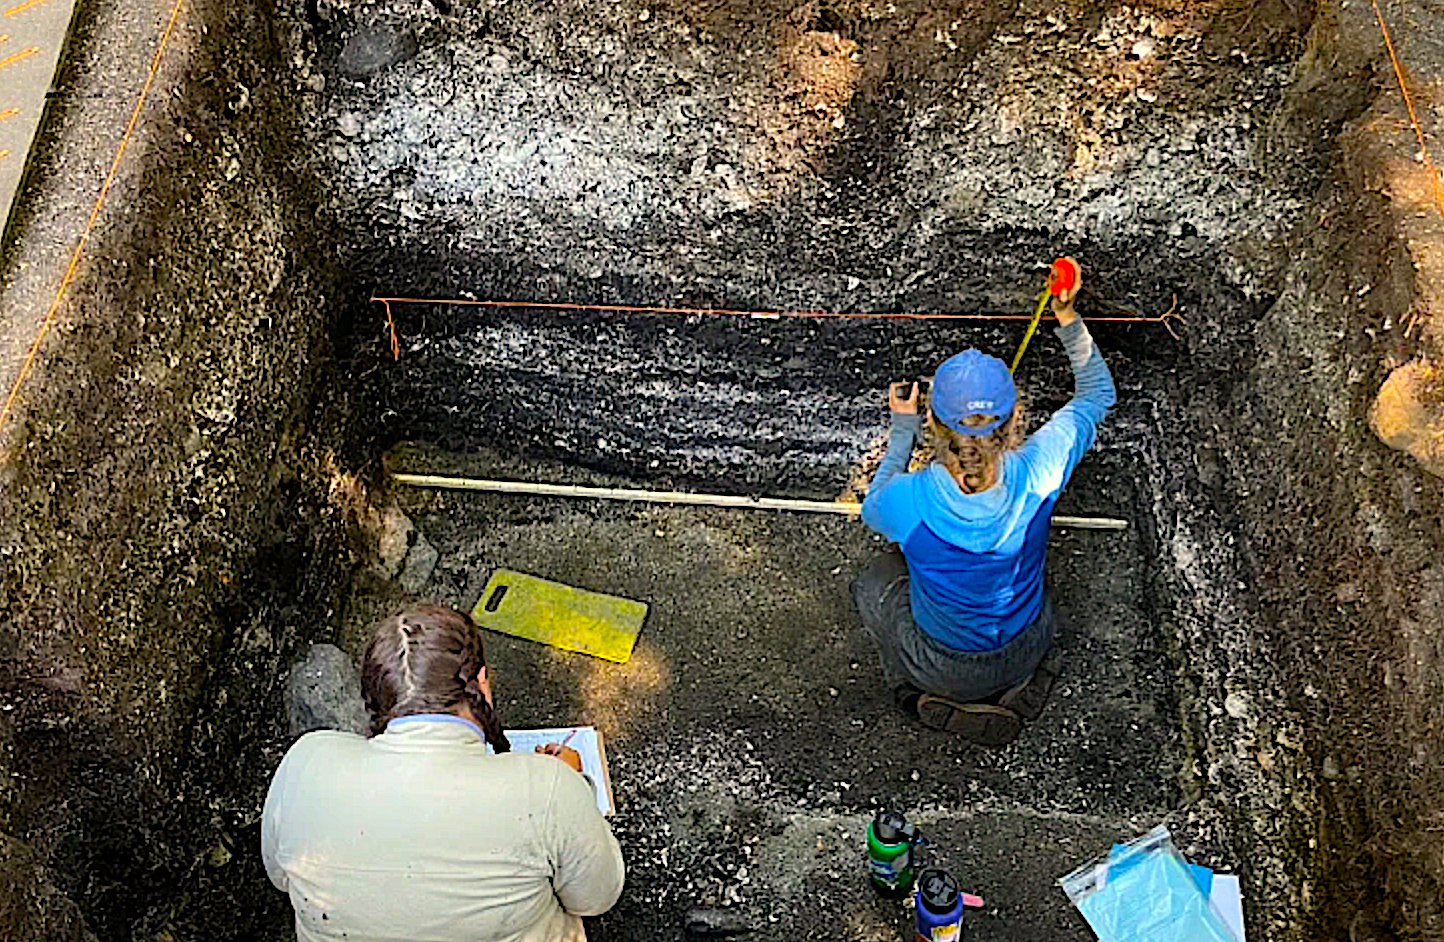 image: Dense shell midden deposit spanning the past 1000 years as exposed during excavation at a Tseshaht First Nation village in the Pacific Northwest (Photo credit: Iain McKechnie).